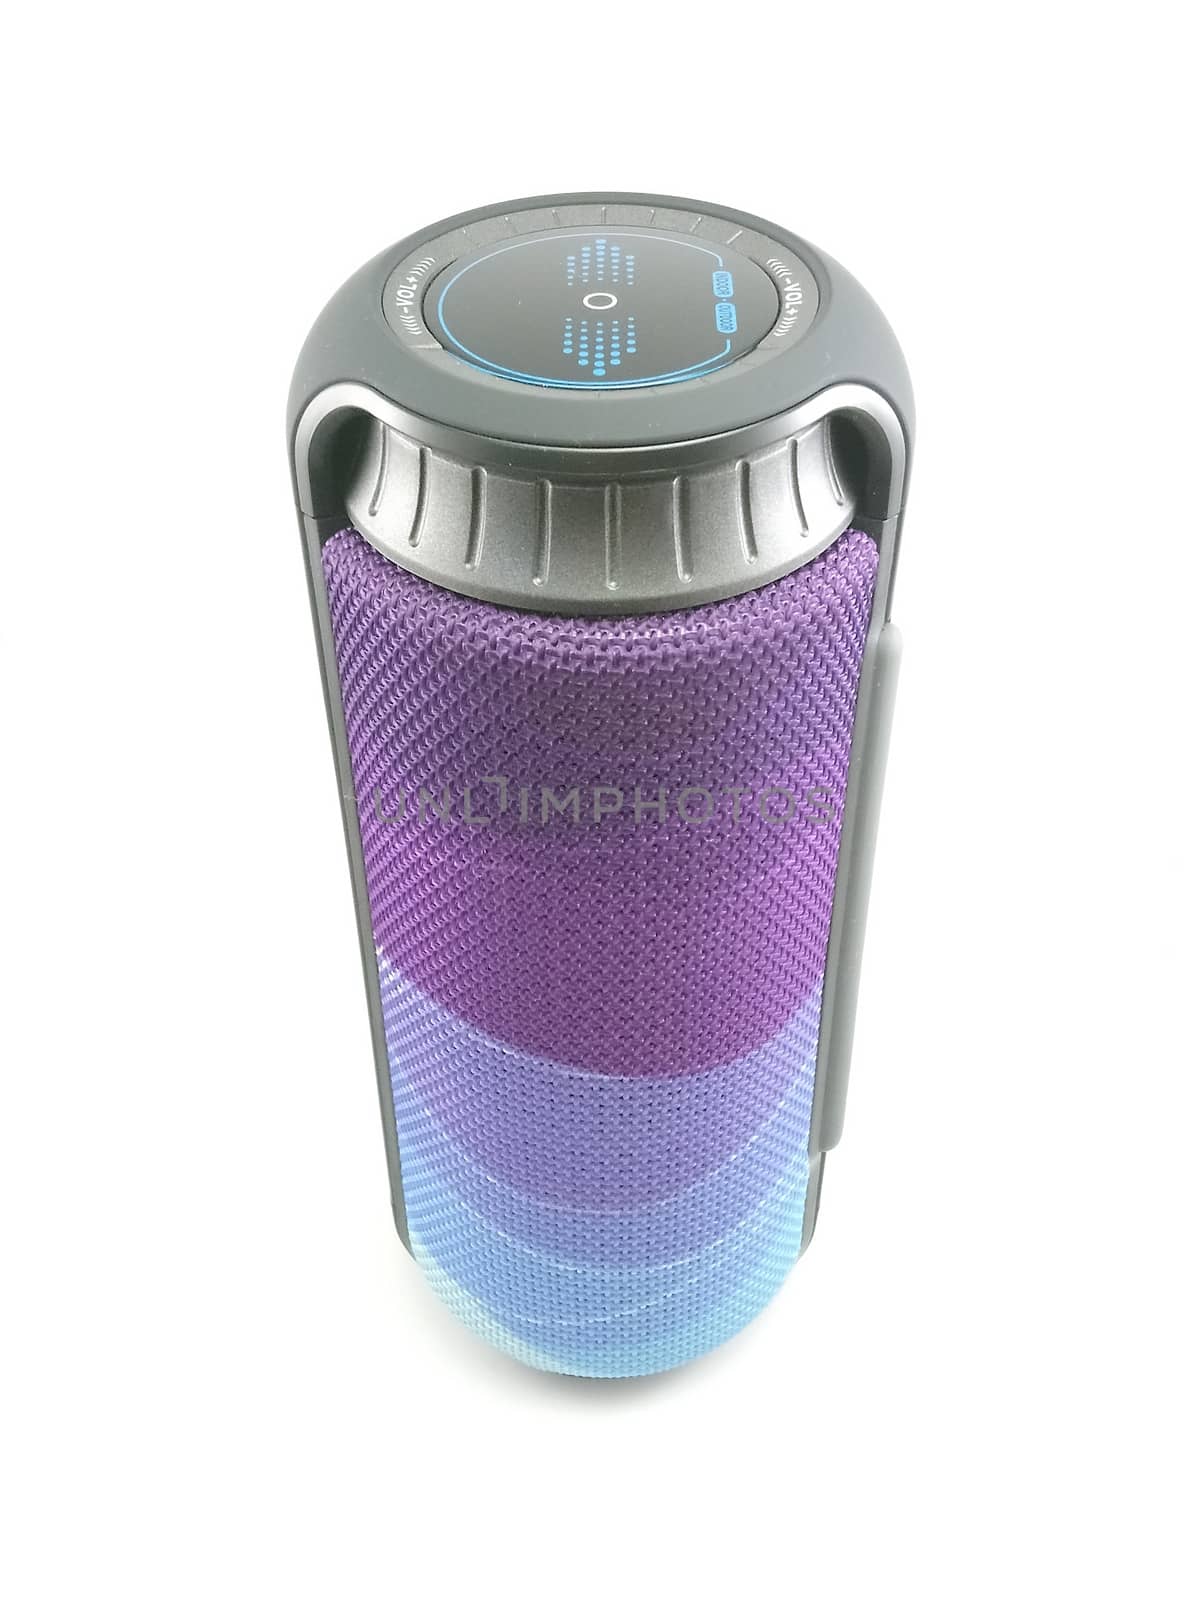 Bluetooth wireless speaker with purple and blue colors use to play music from smartphone